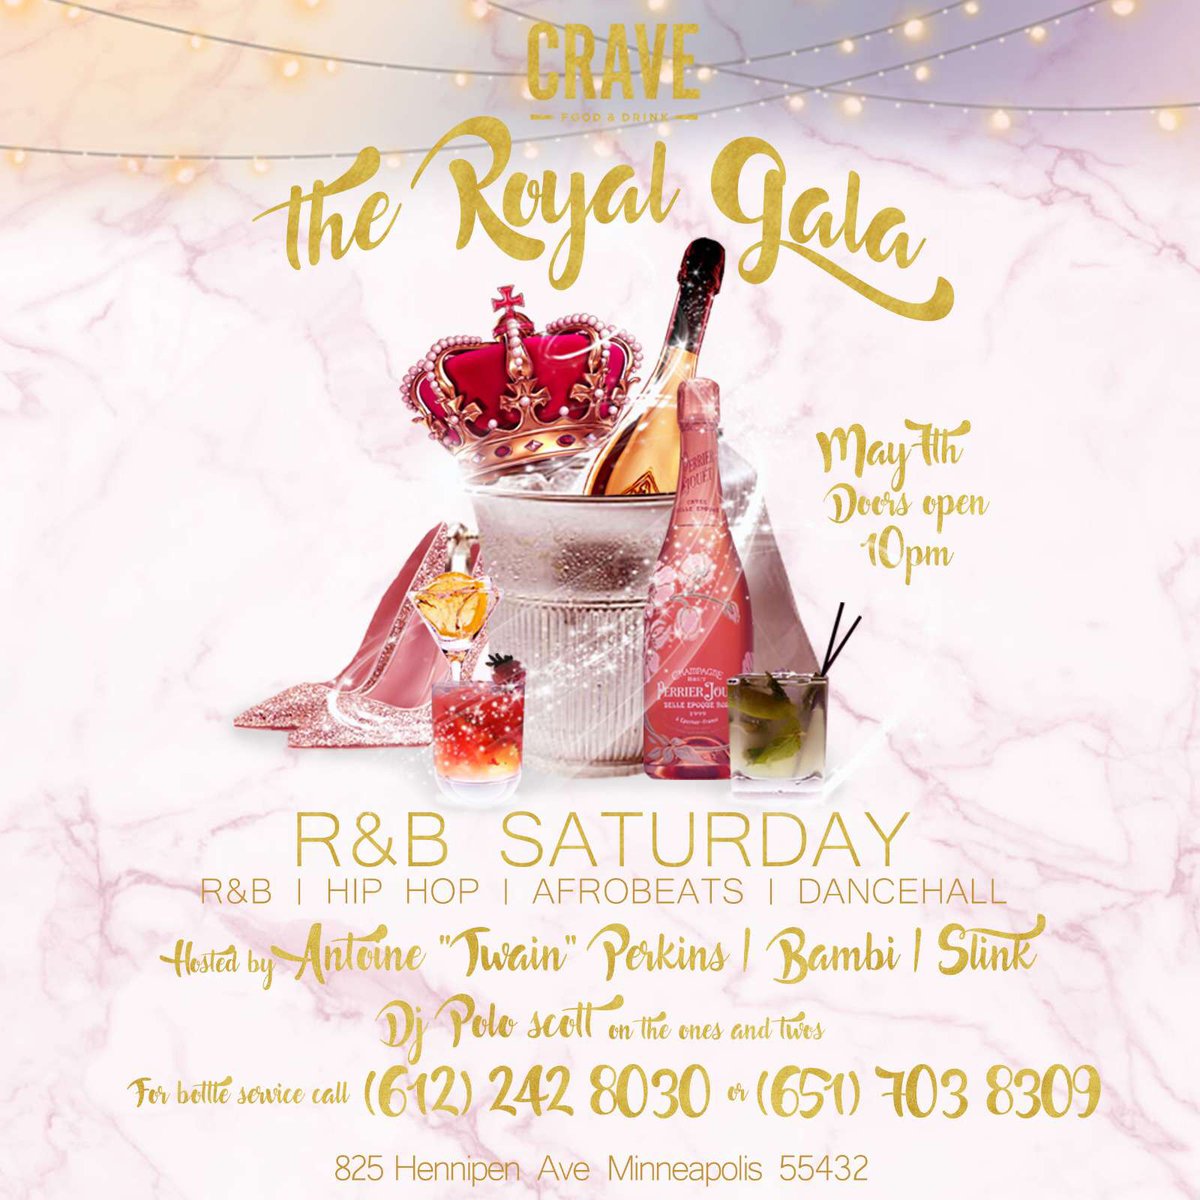 My dog Slink havin me come out May 7th and do this party with him!! 

THE ROYAL GALA 👑🎶
R&B SATURDAYS 

WITH SPECIAL GUEST ASIA EROS! (@asiaerosishot) 
(More guests to be announced)

May 7th
@craveamerica MPLS
10pm

@thepoloscott on the set 

#royalgala #rnbsaturdays #asiaeros